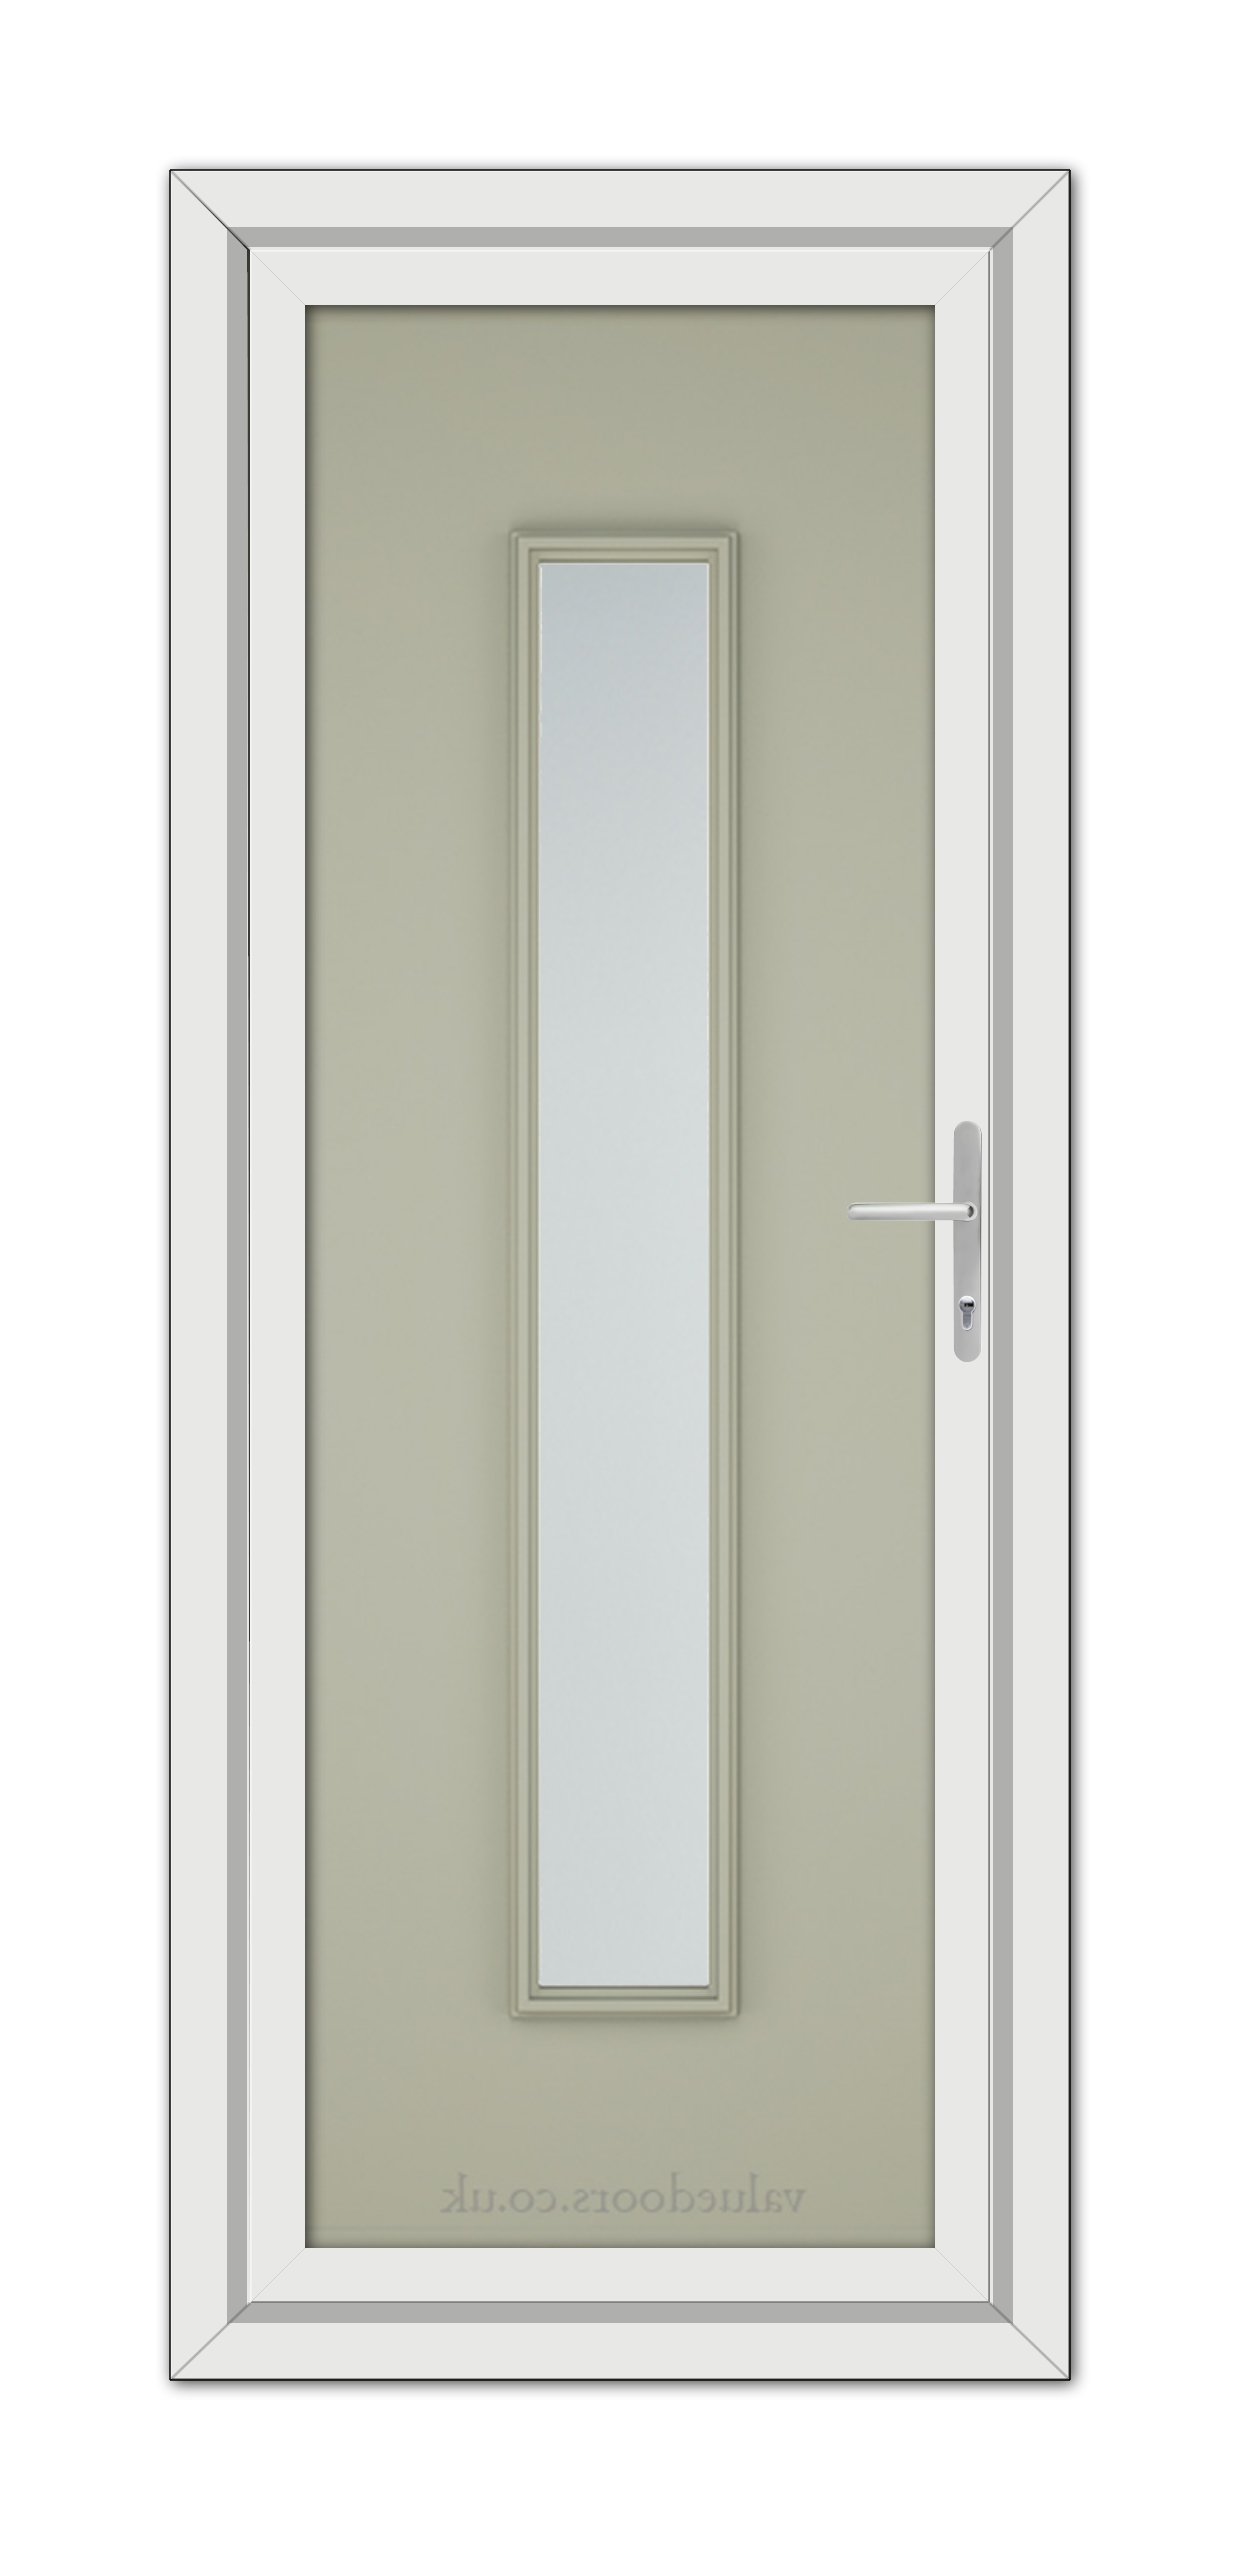 Vertical image of a Agate Grey Rome uPVC Door with a long, narrow window and a handle on the right side, set within a white frame.